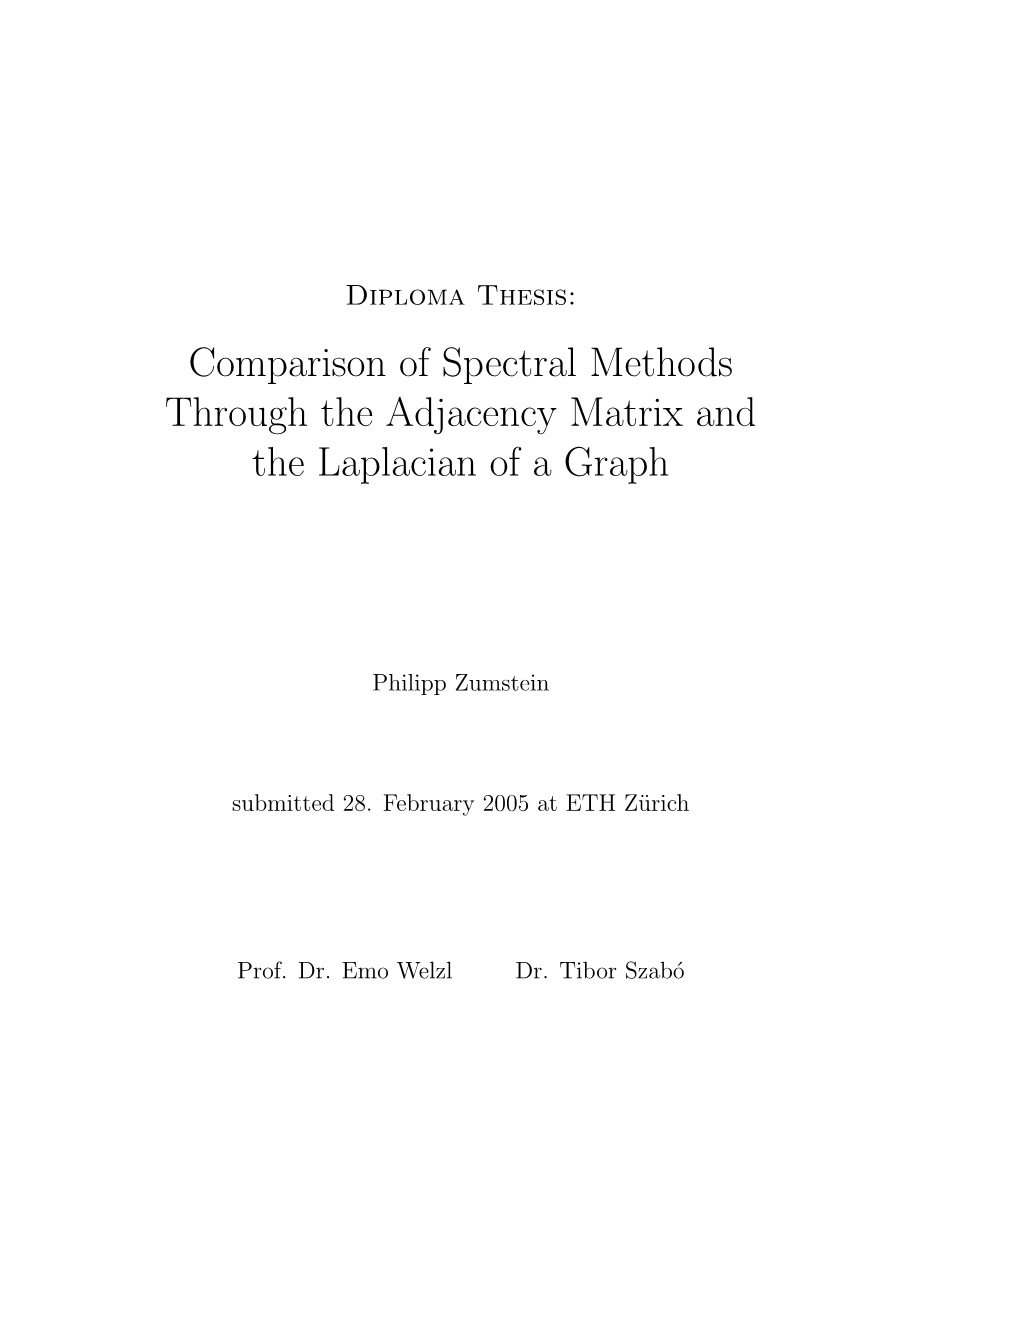 Comparison of Spectral Methods Through the Adjacency Matrix and the Laplacian of a Graph